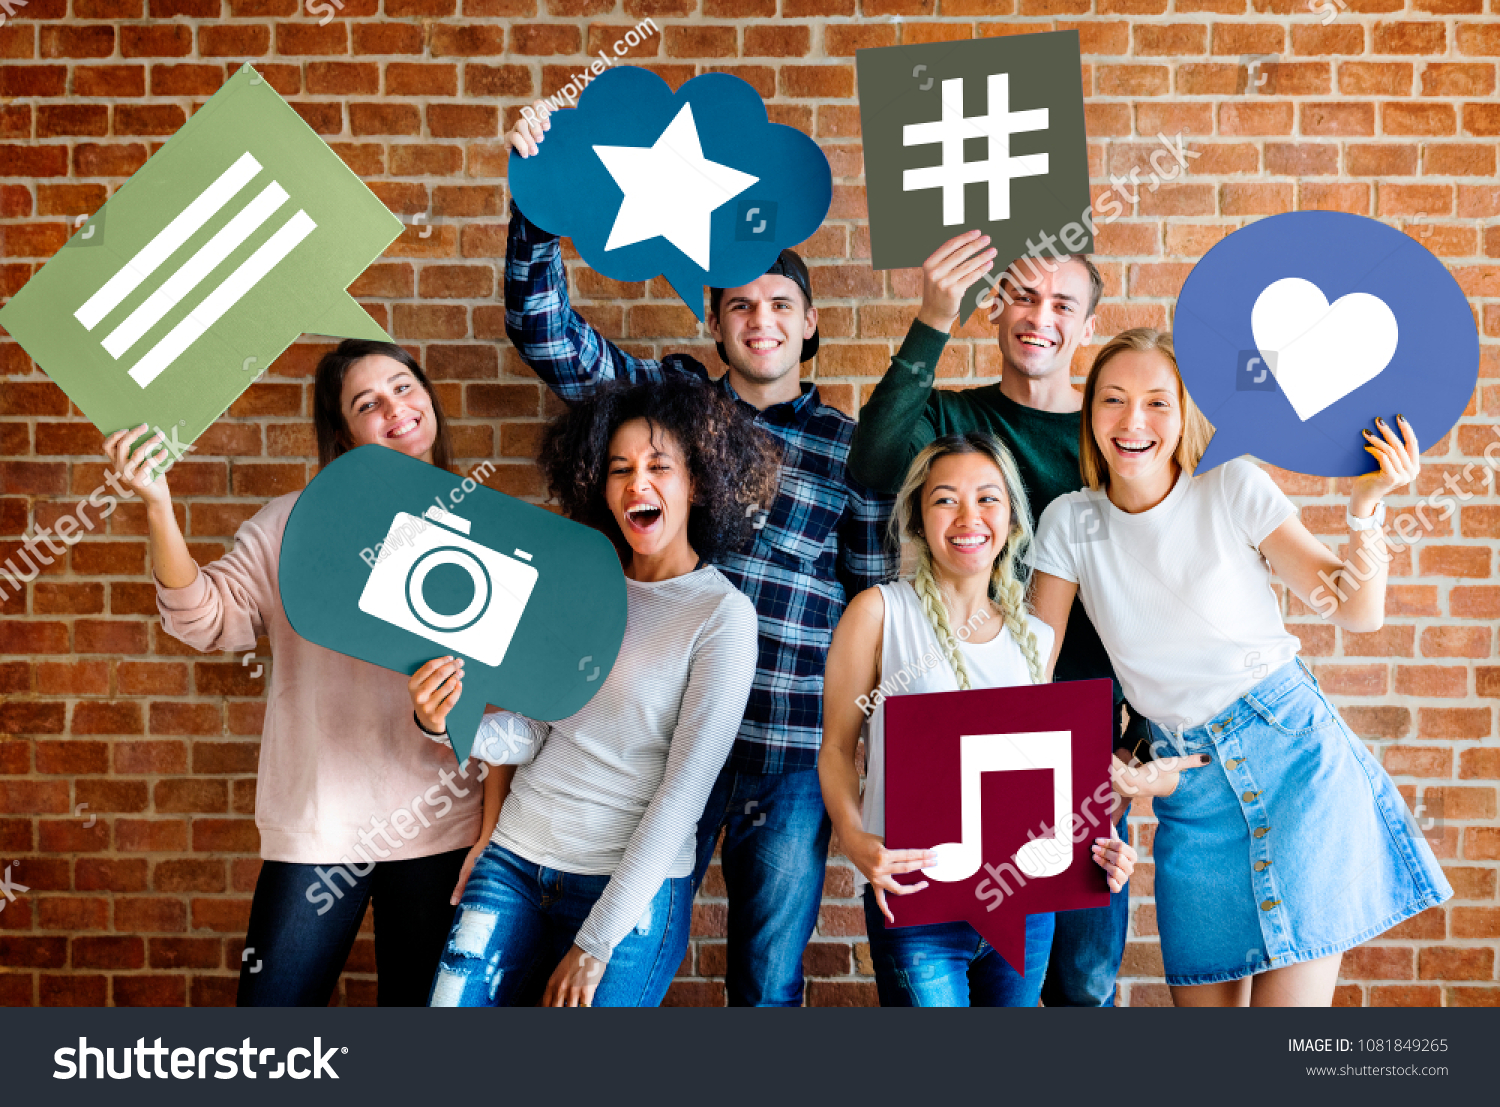 Happy young adults holding thought bubble with social medai concept icons #1081849265